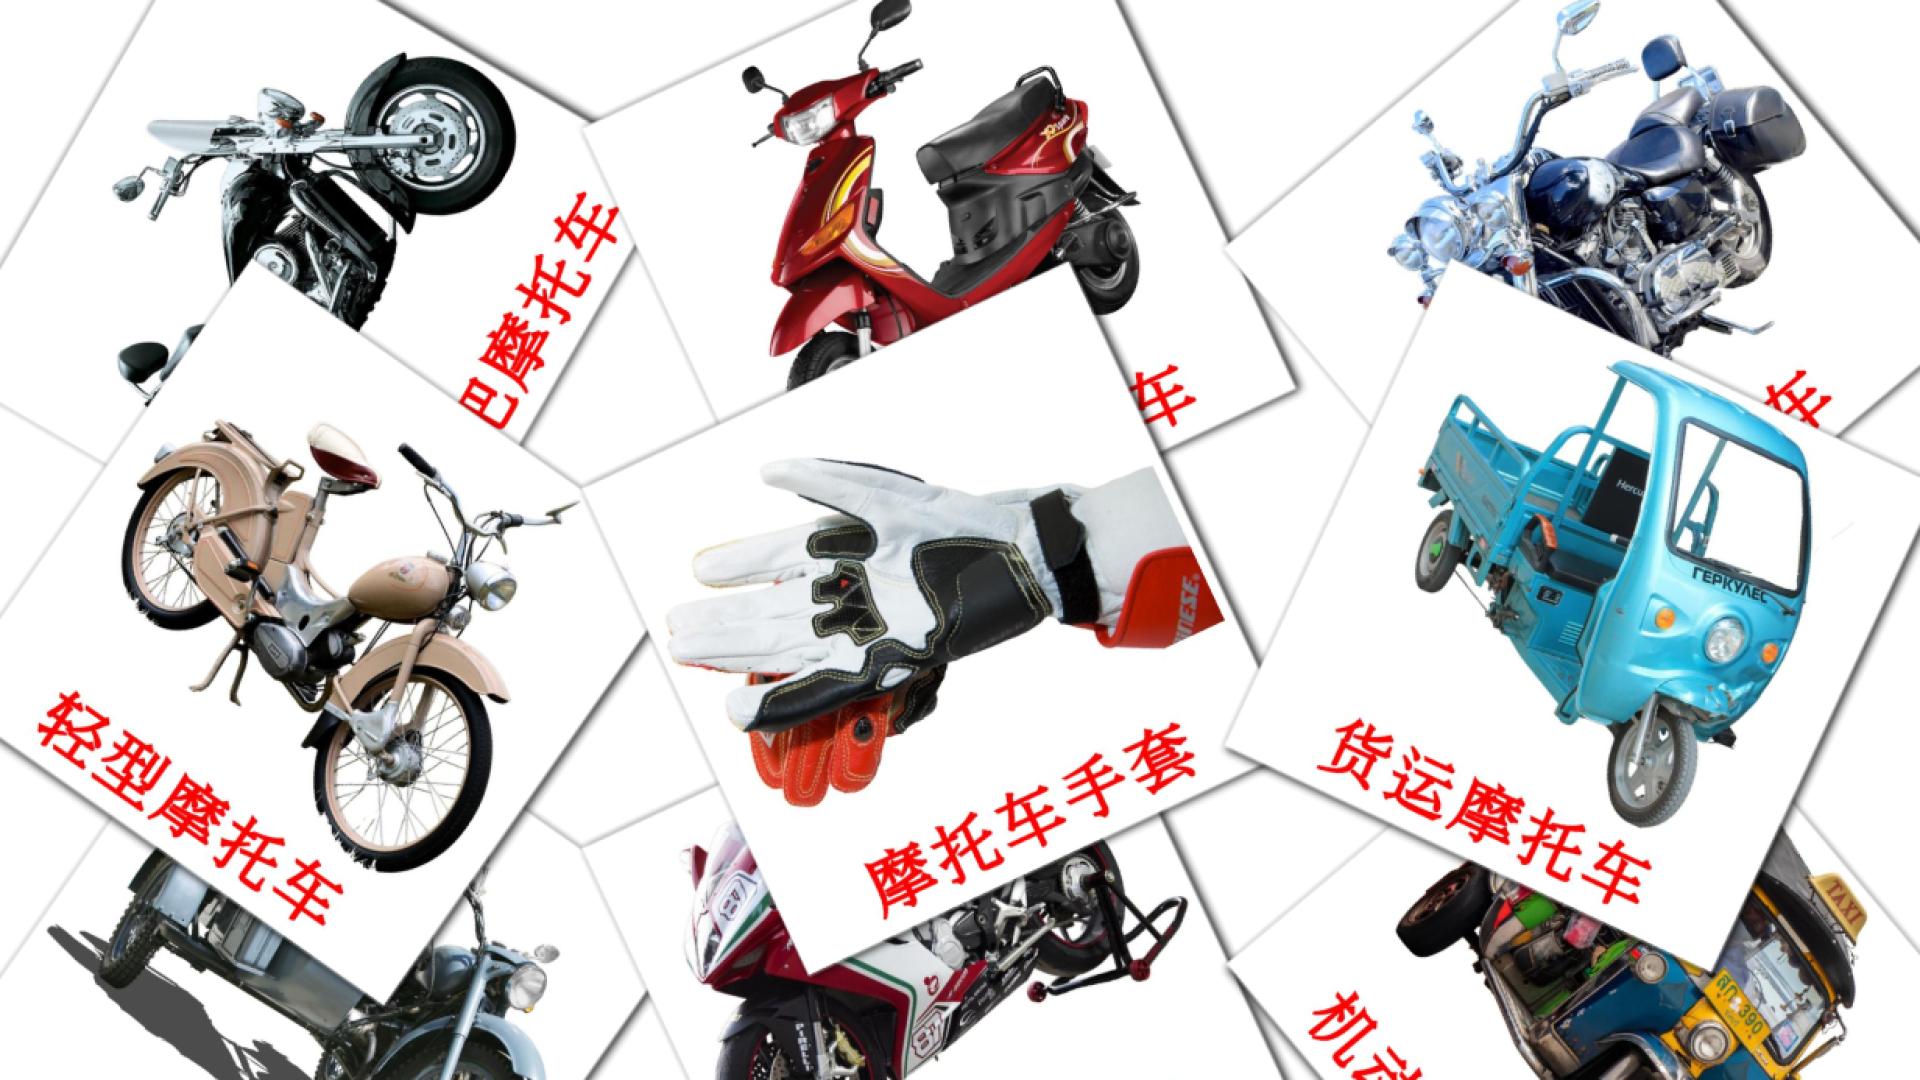 Motorcycles - chinese(Simplified) vocabulary cards